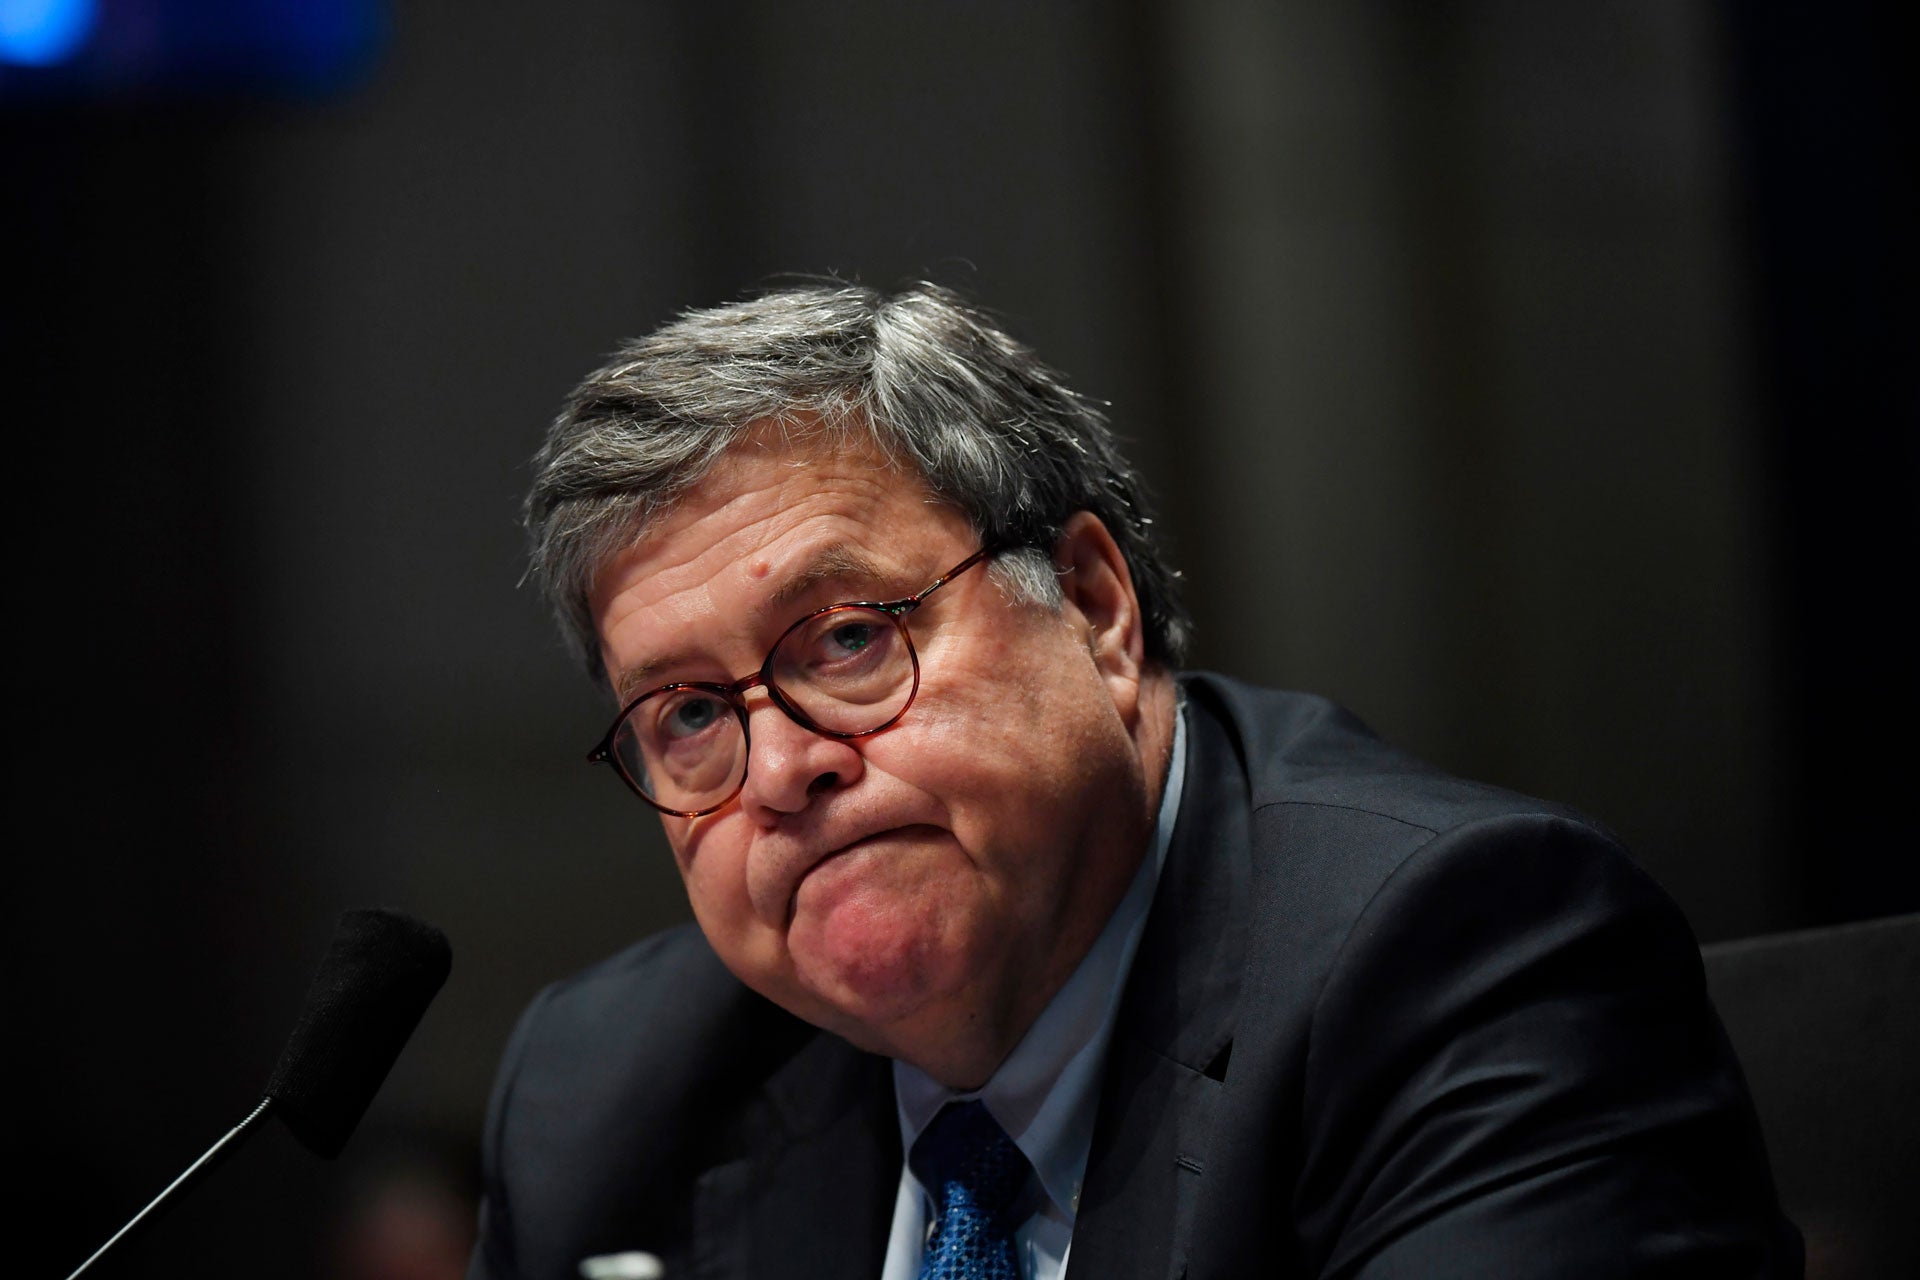 US Attorney General William Barr testifies before the House Oversight Committee on Capitol Hill in Washington, July 28, 2020.